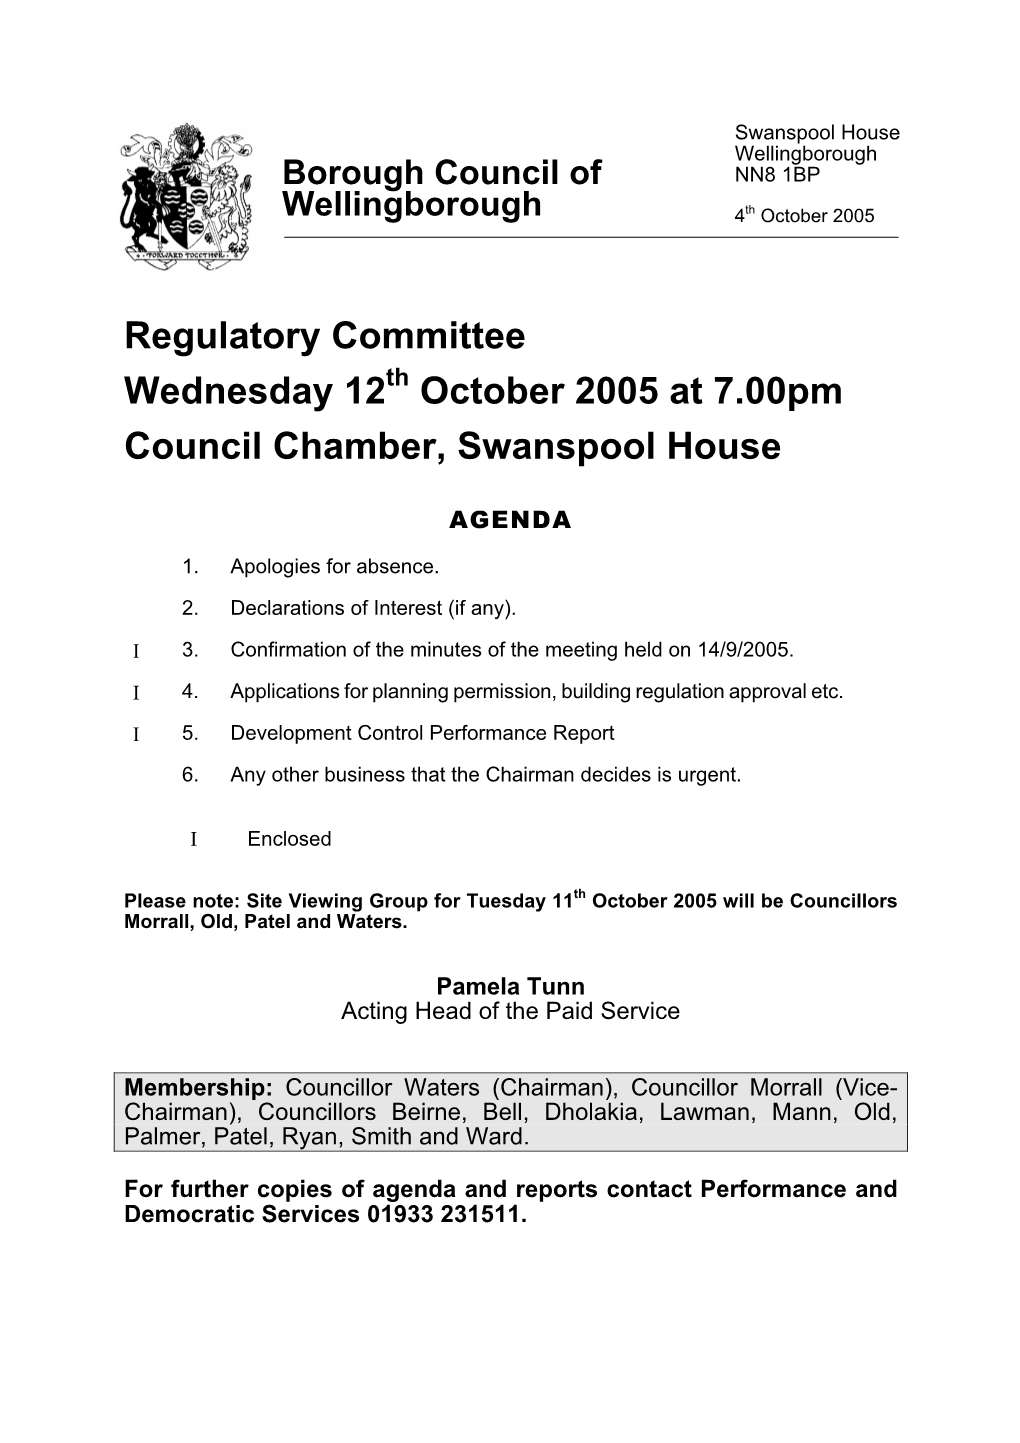 Regulatory Committee Wednesday 12Th October 2005 at 7.00Pm Council Chamber, Swanspool House